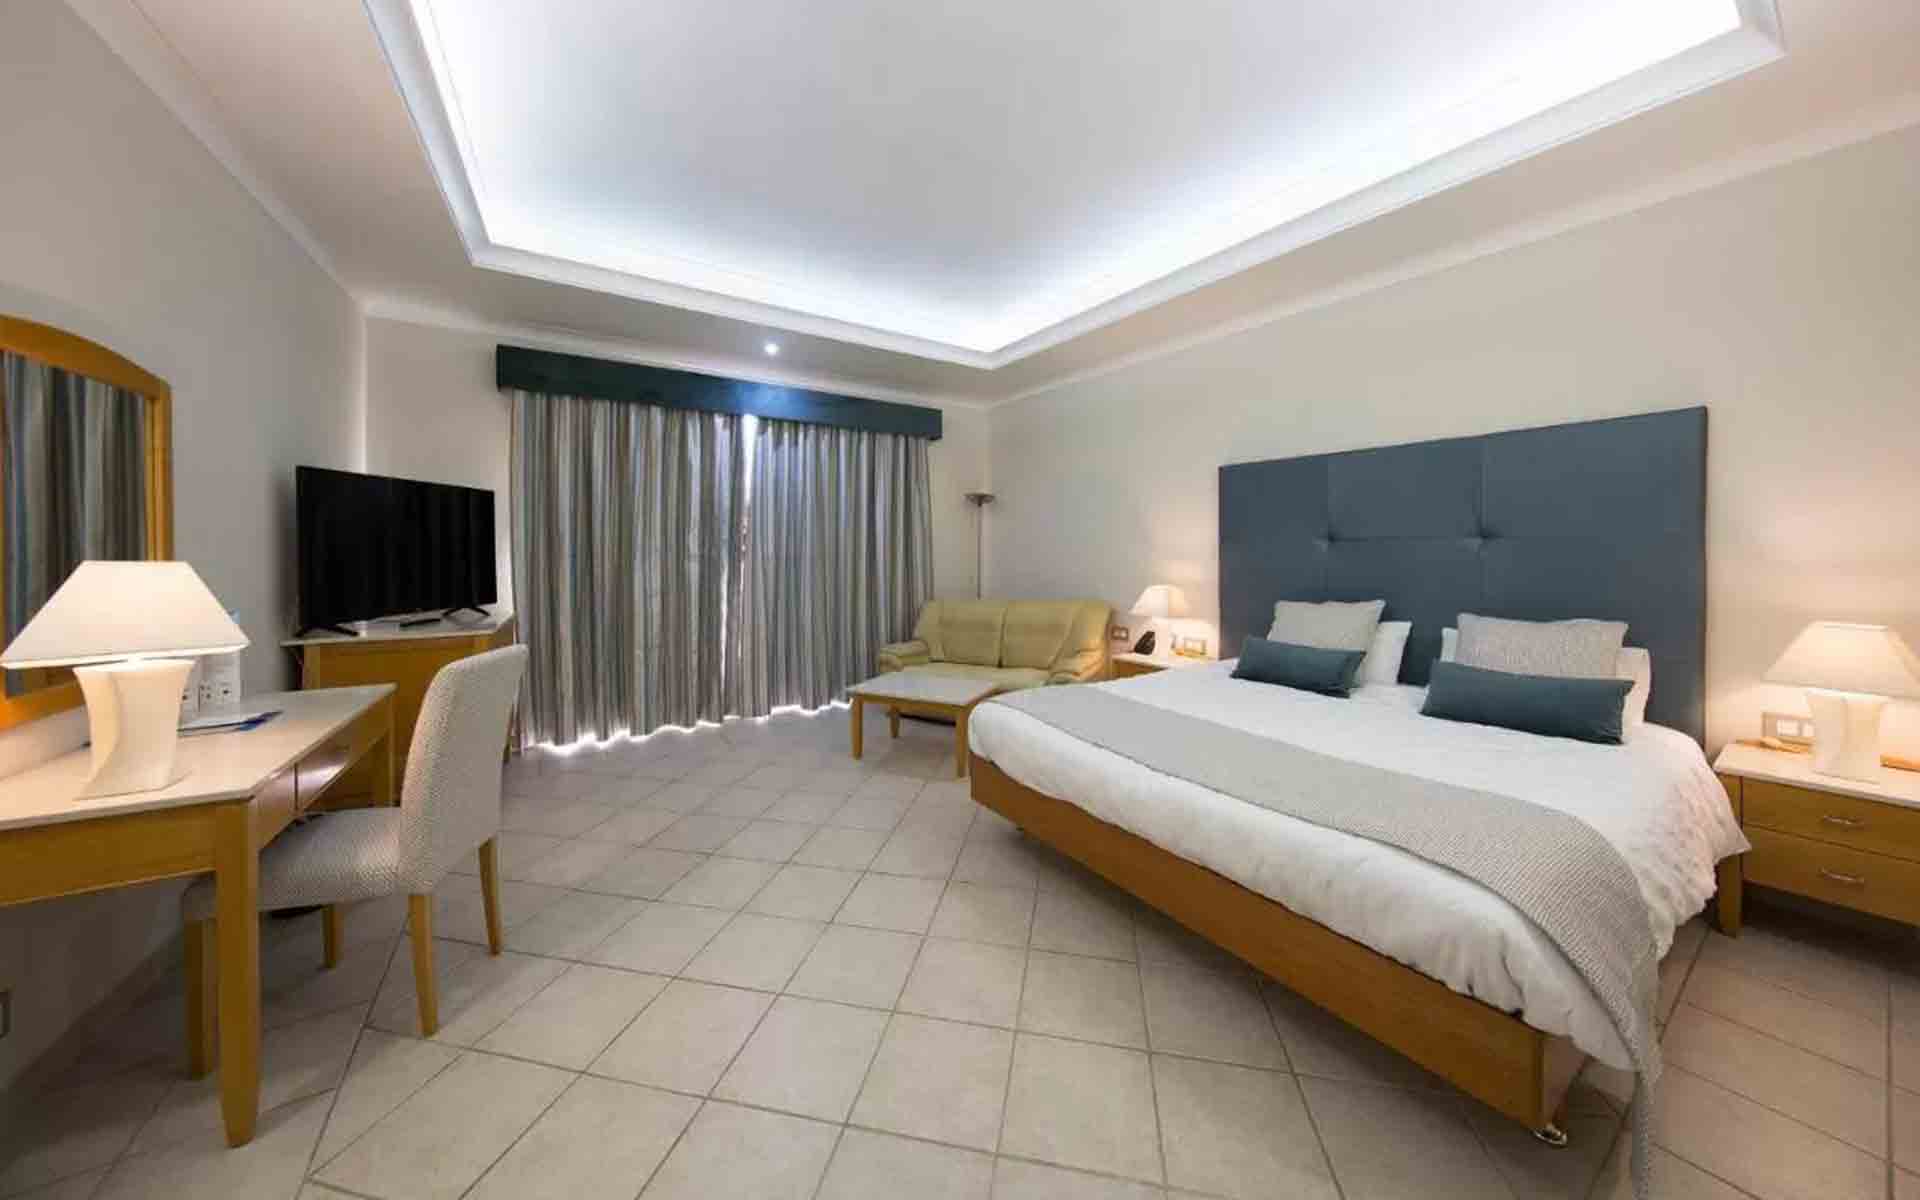 Paradise Bay Resort Hotel is one of Mellieha bay hotels